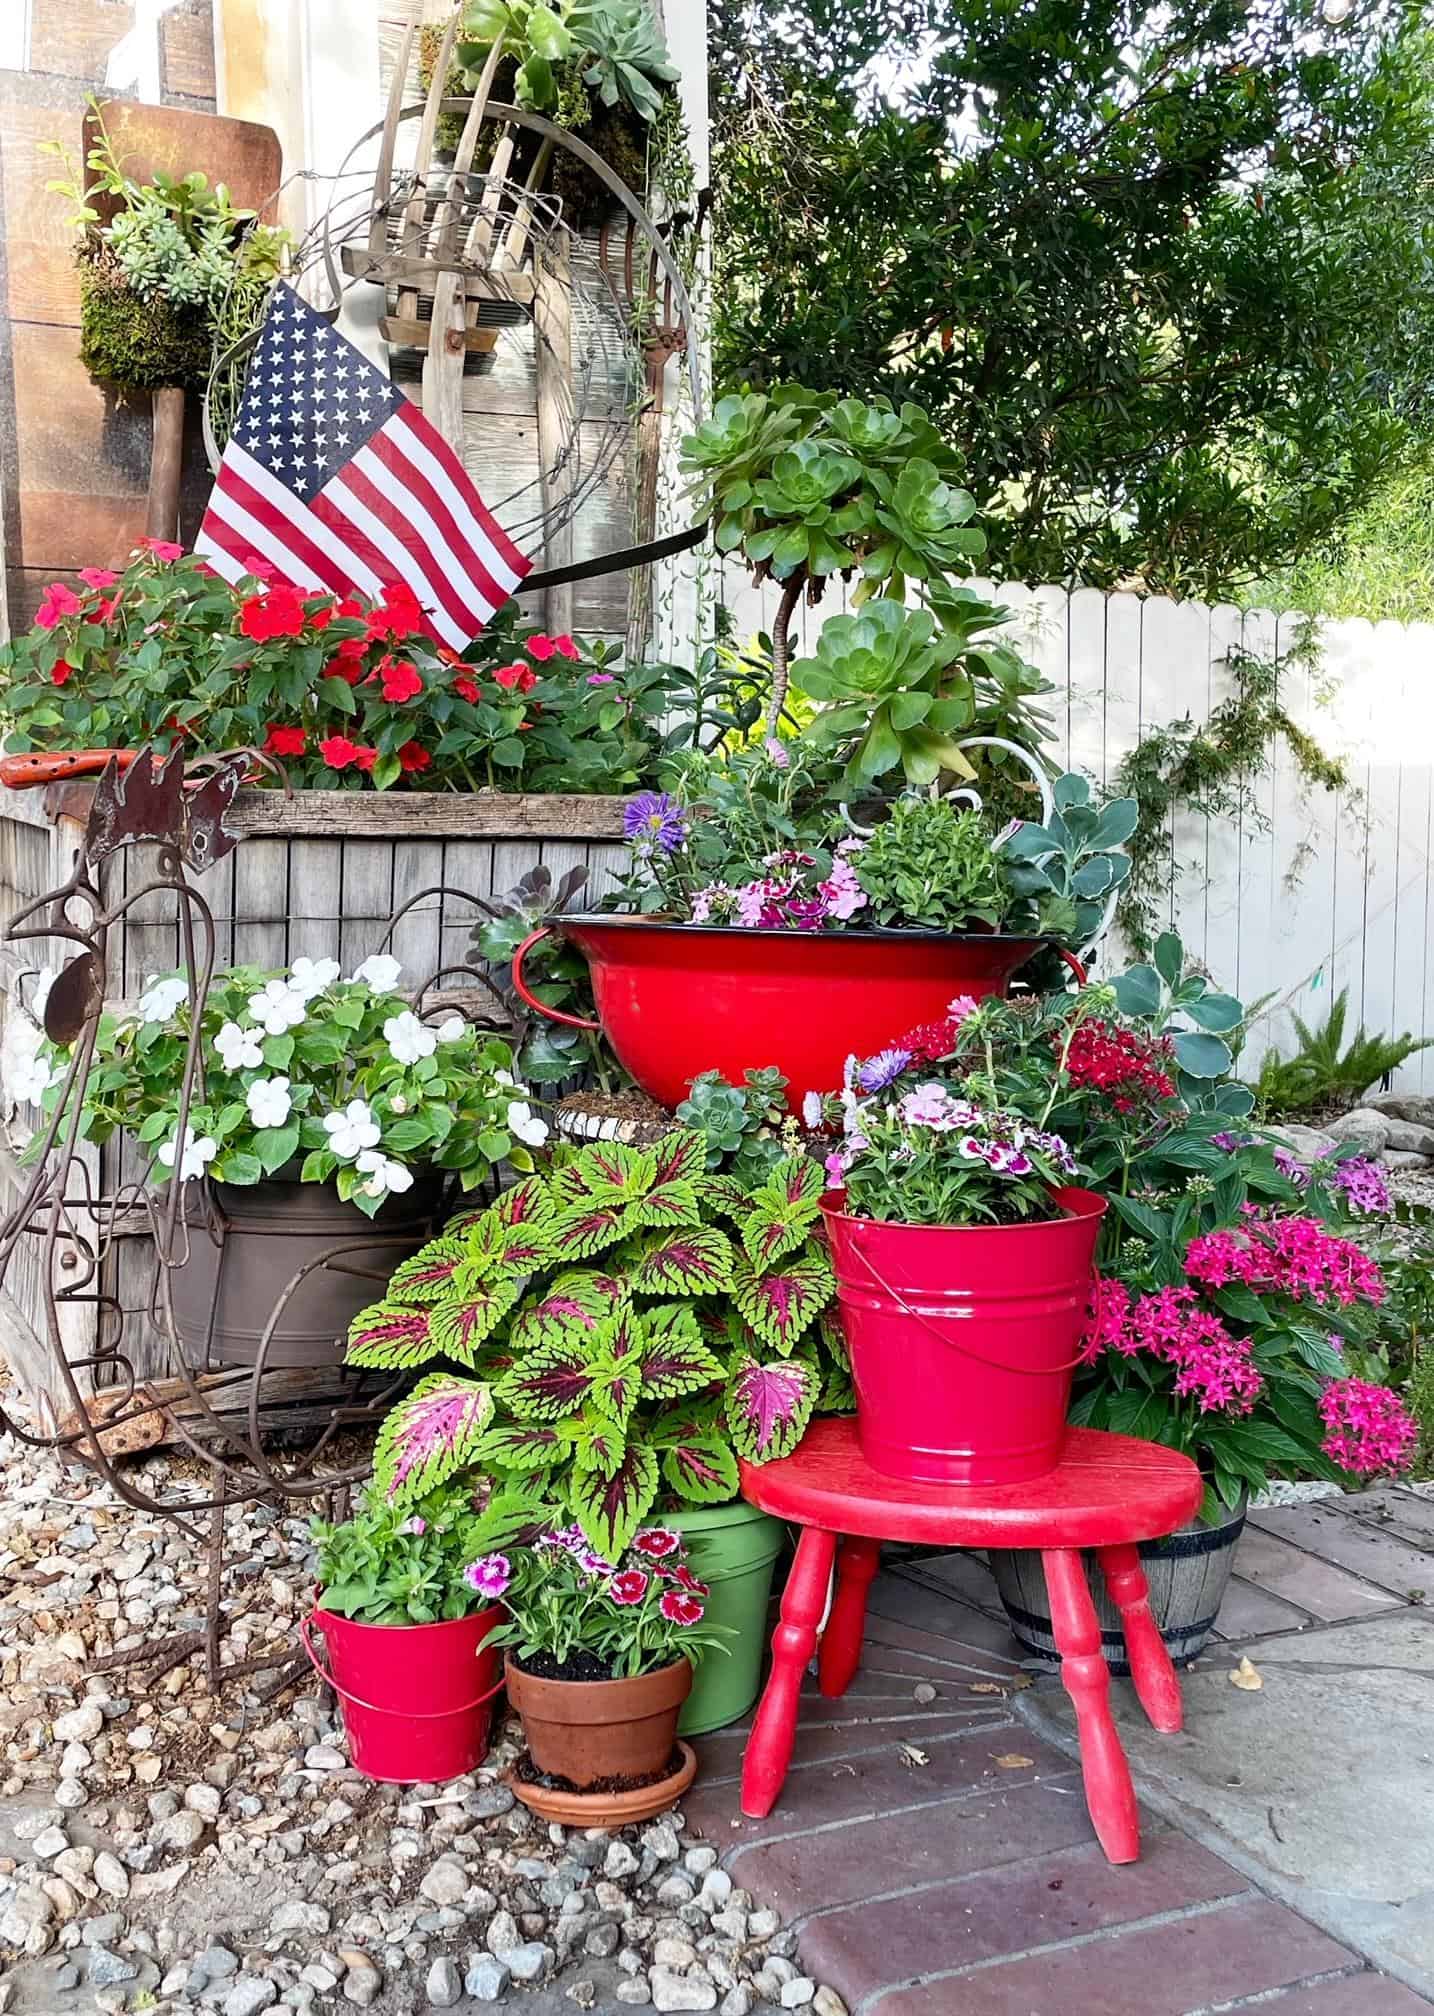 Decorating with American Flags in the garden by putting flags in flower pots